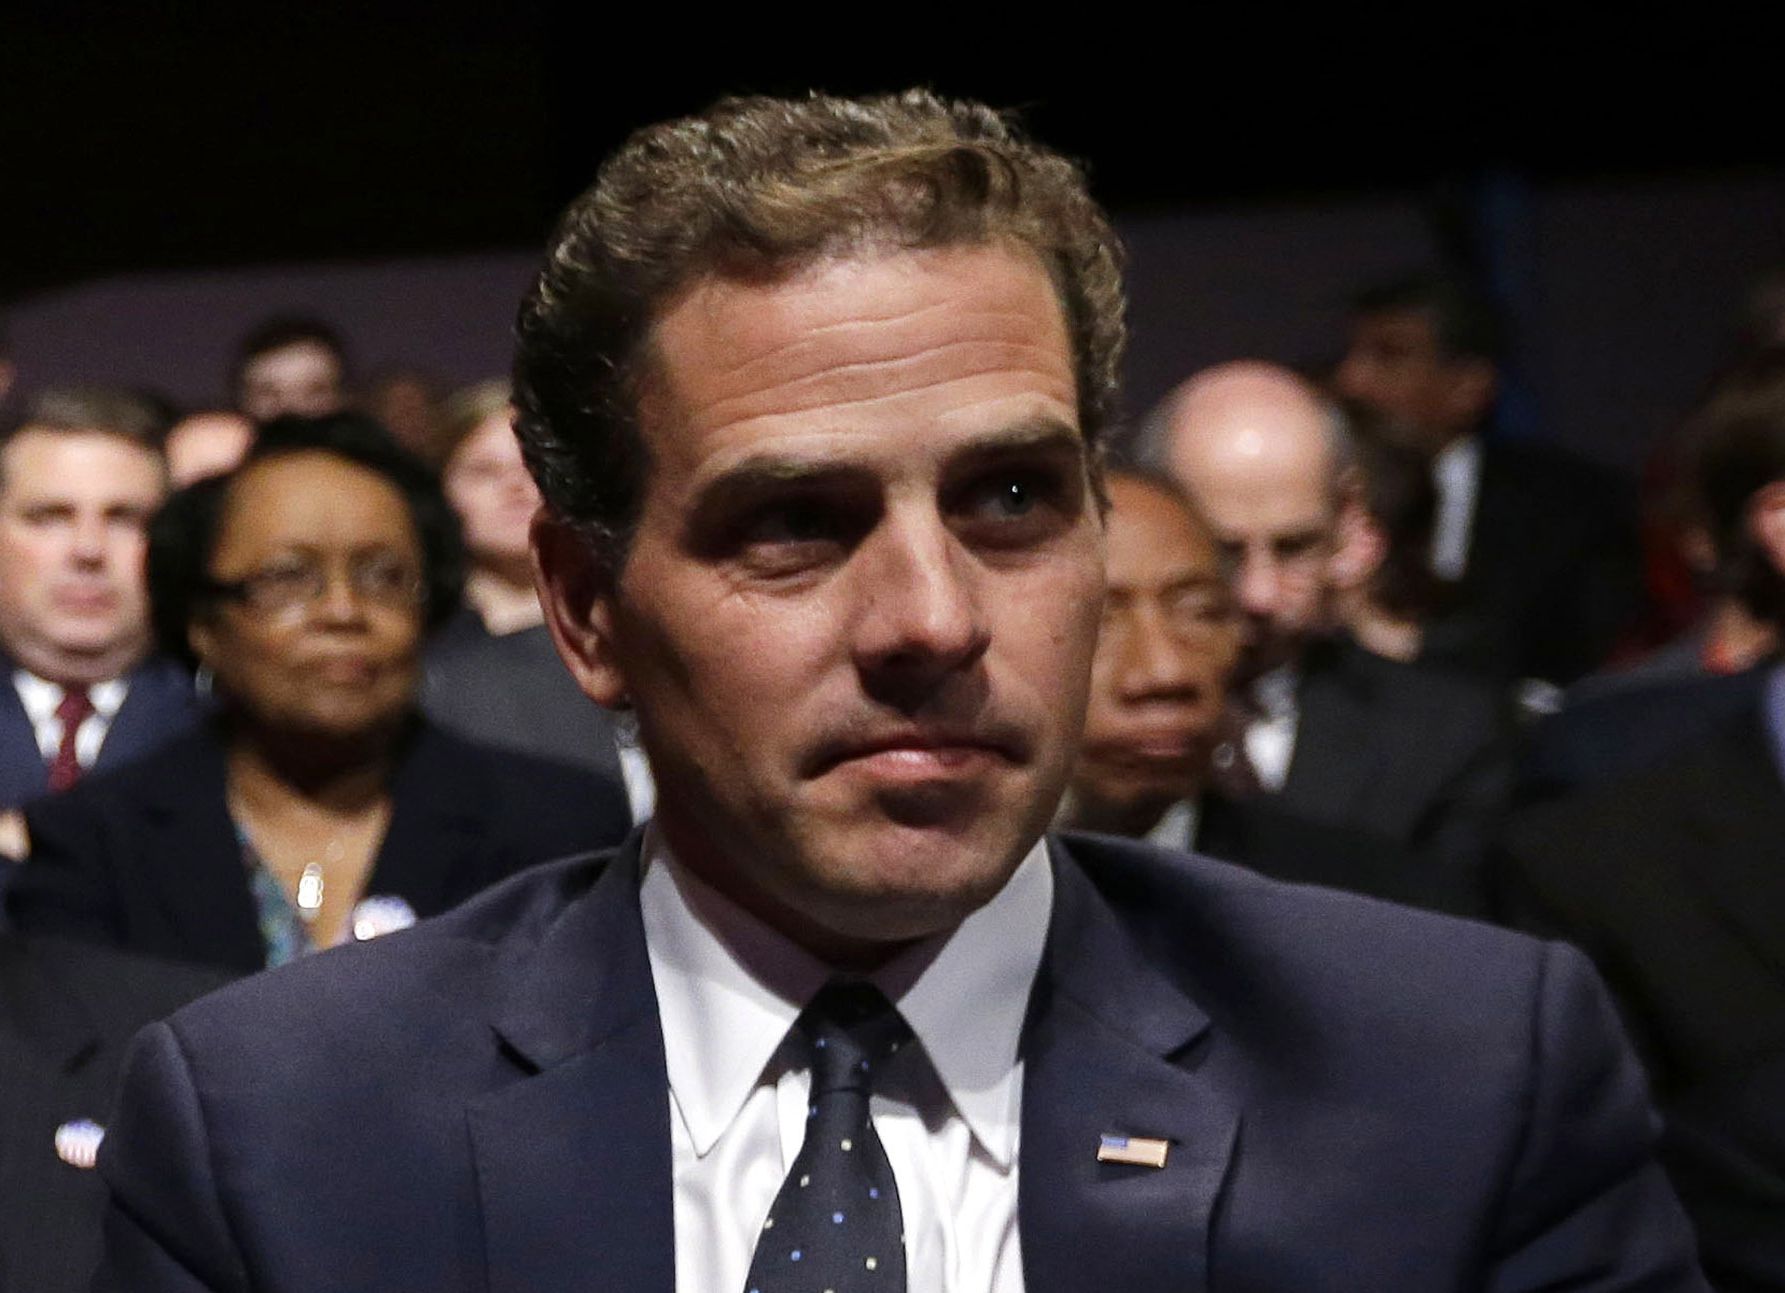 Hunter Biden's Tangled Tale Comes Front and Center - The New York